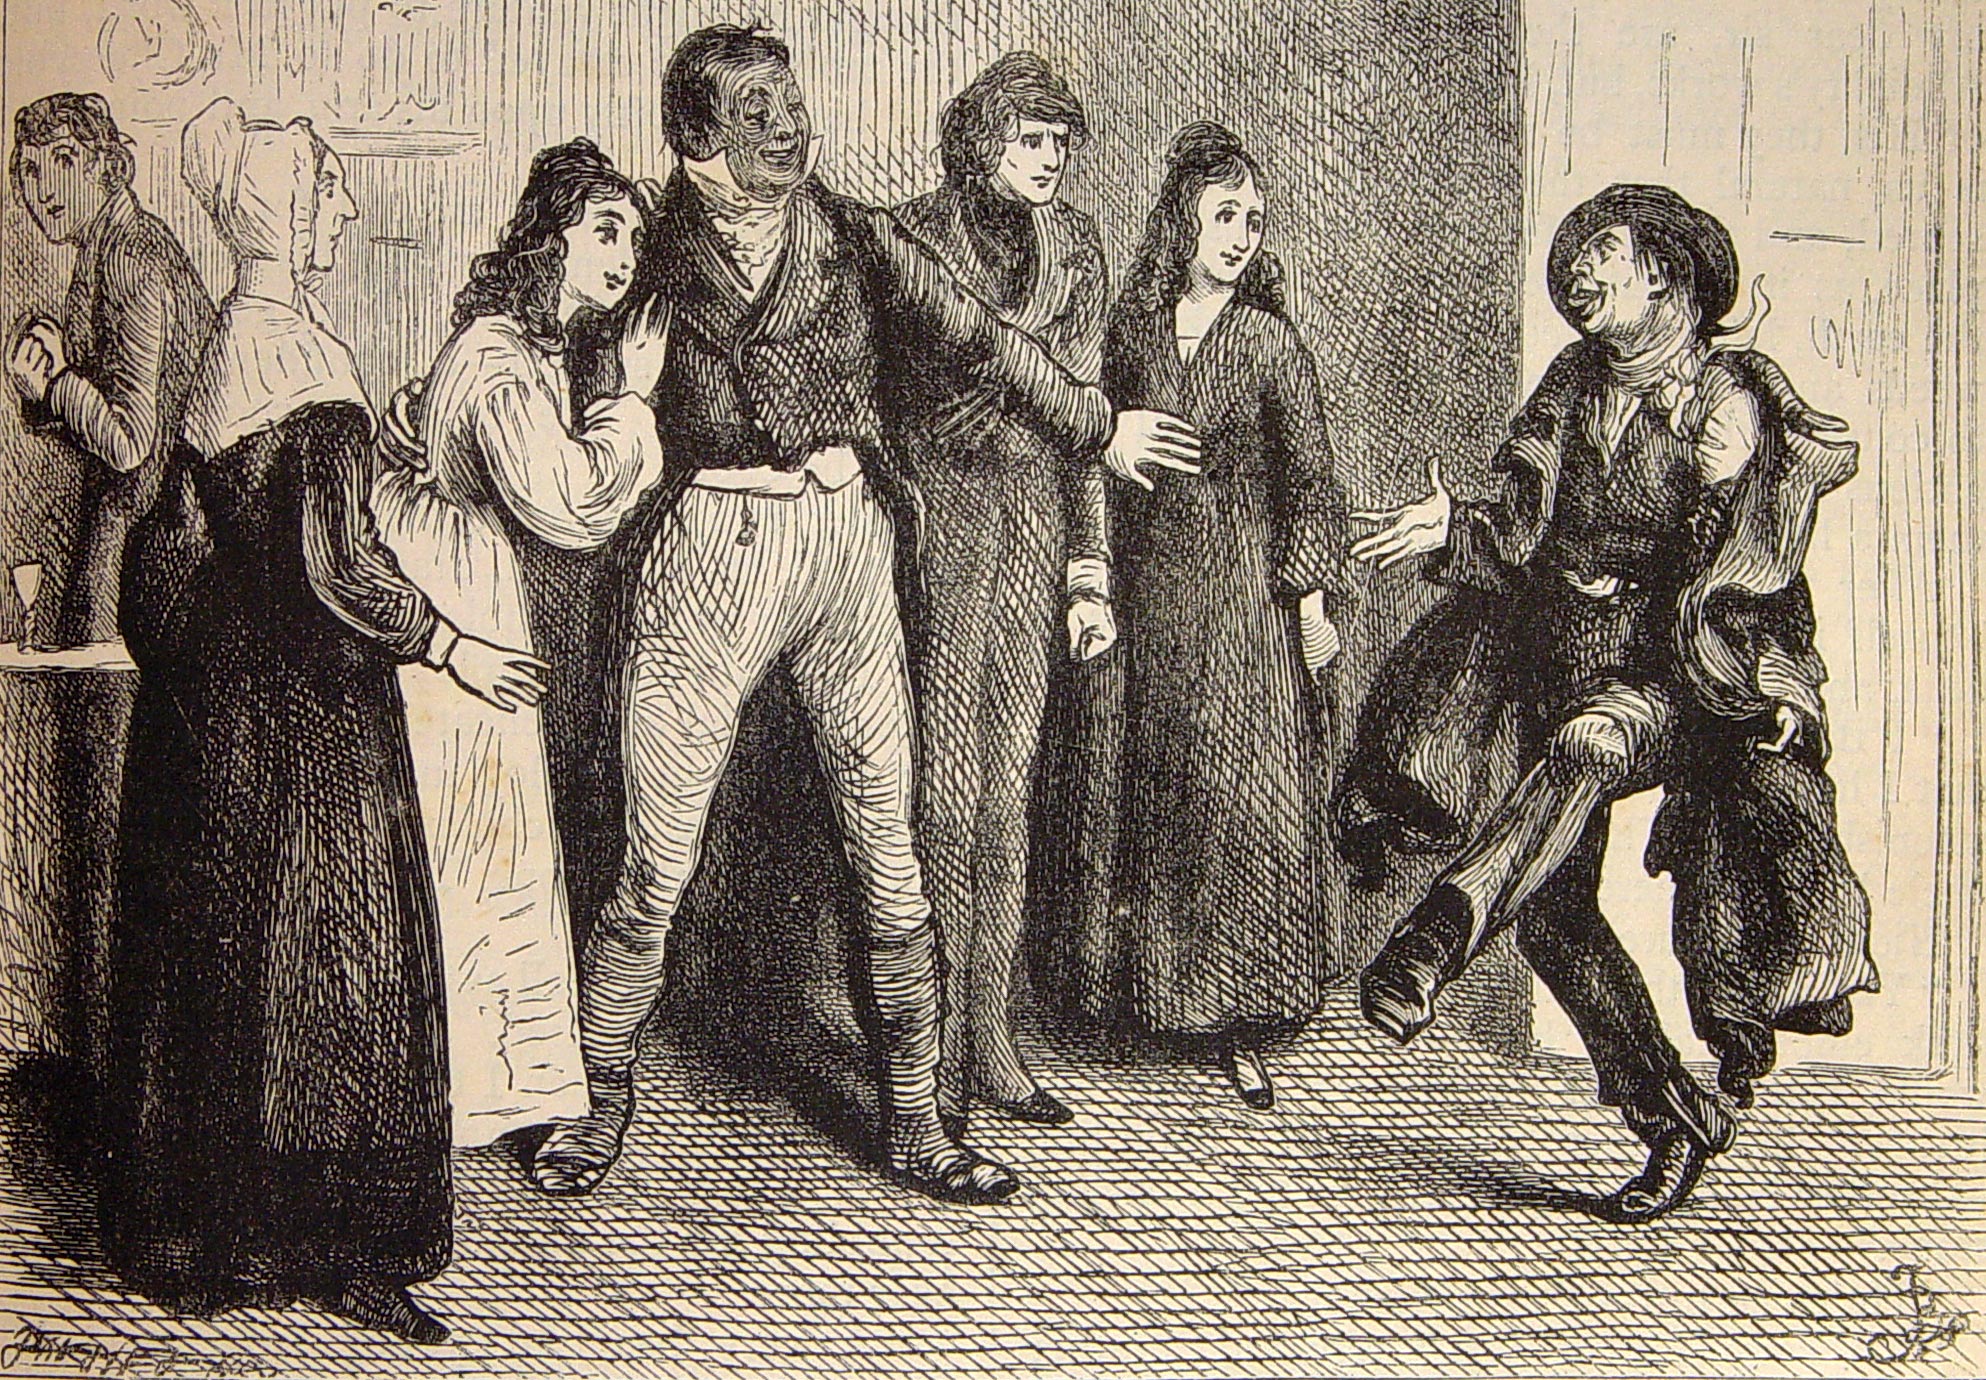 an old fashion picture shows men in costume talking